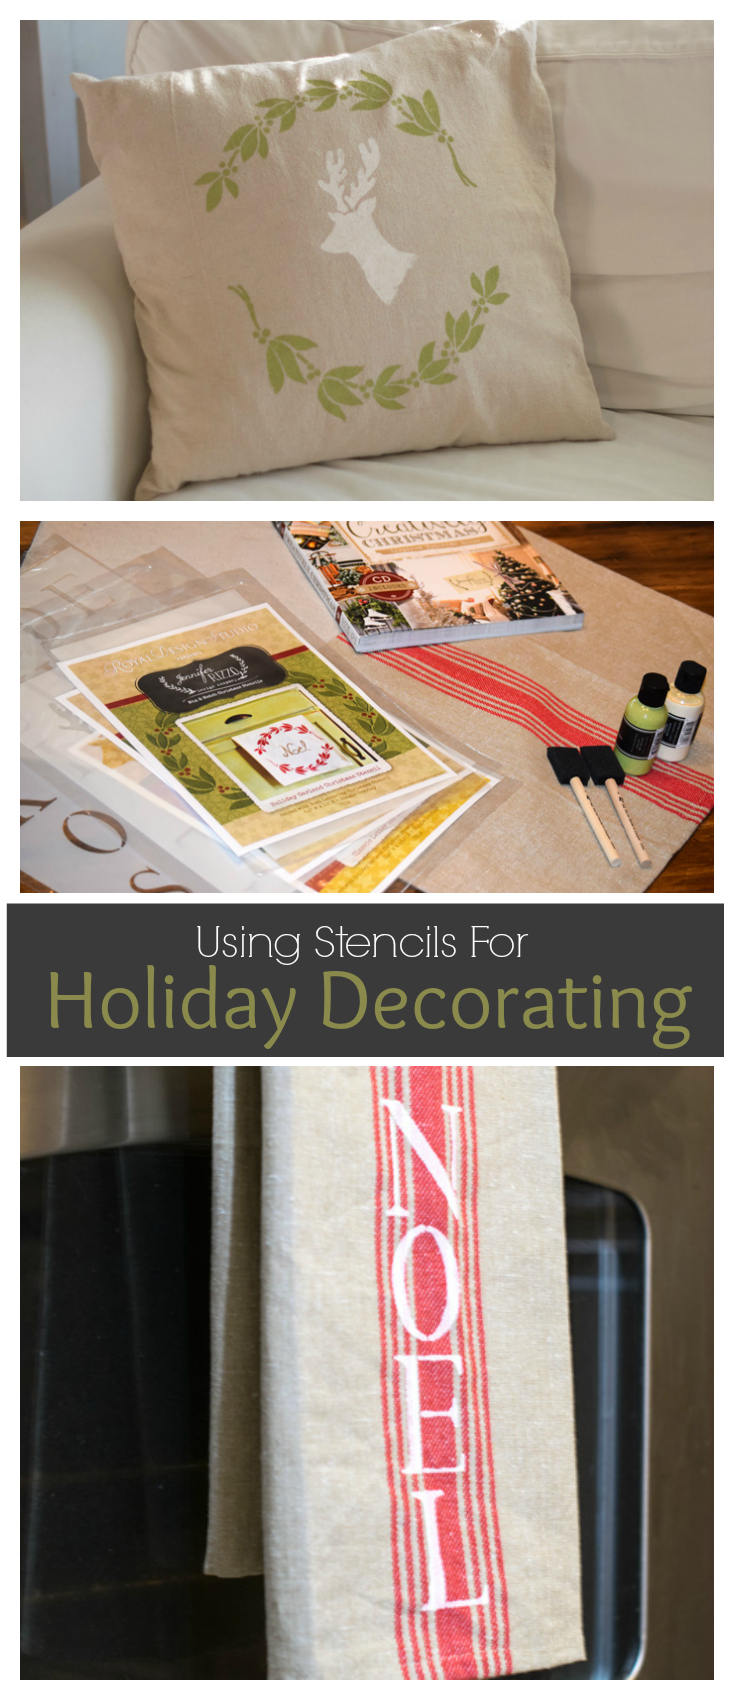 Use Stencils for Easy Holiday Decorating! Deck the Halls! Looking for a way to bring Creativity into your Holiday Decor? Use easy to find items like pillow covers or dish towels, along with stencils to decorate your home for the Holidays. Enjoy crafting your own decorations this Christmas! #Christmas #Holidays #crafts #HolidayIdeas